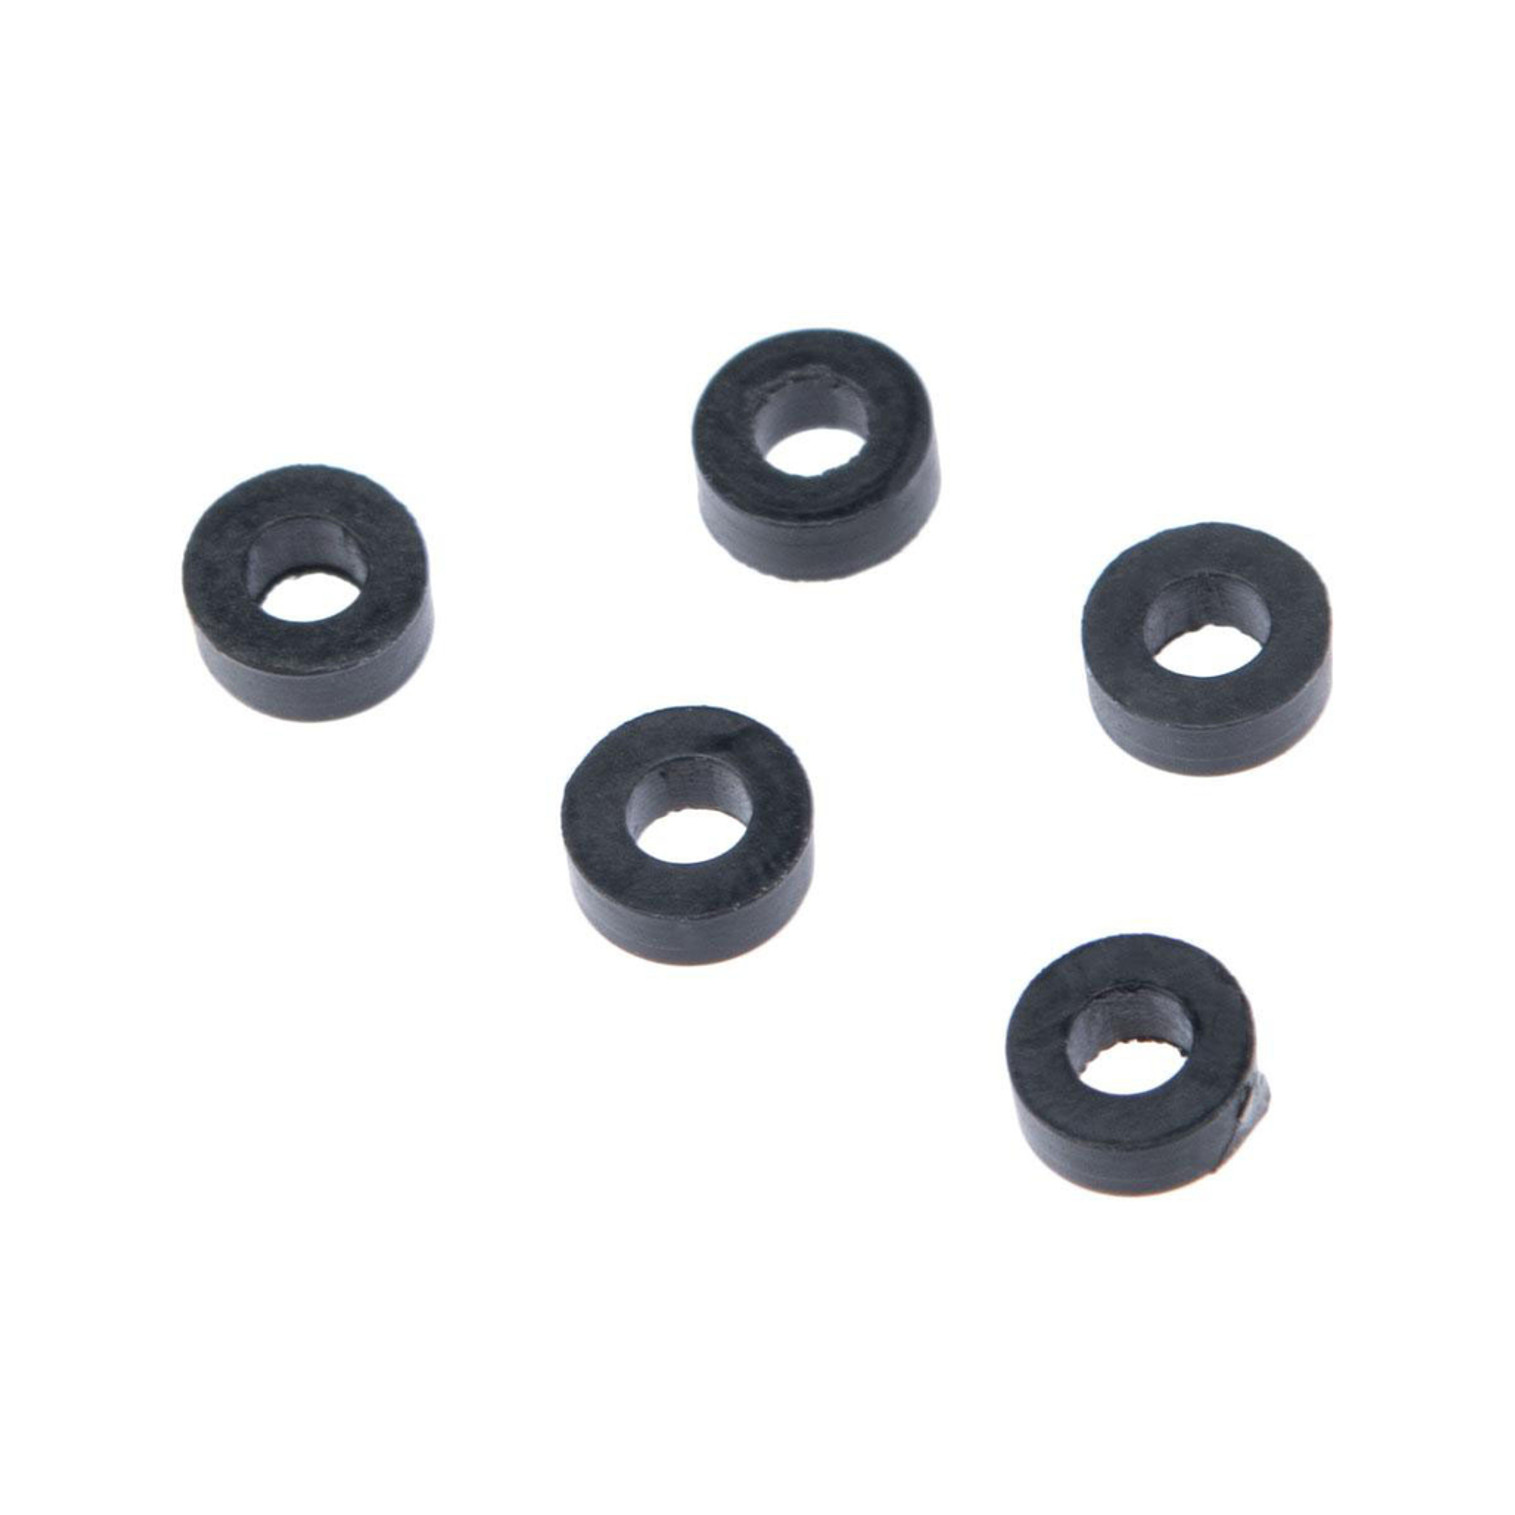 Maple Leaf Inlet Valve O-ring for Airsoft GBB Pistol Magazines